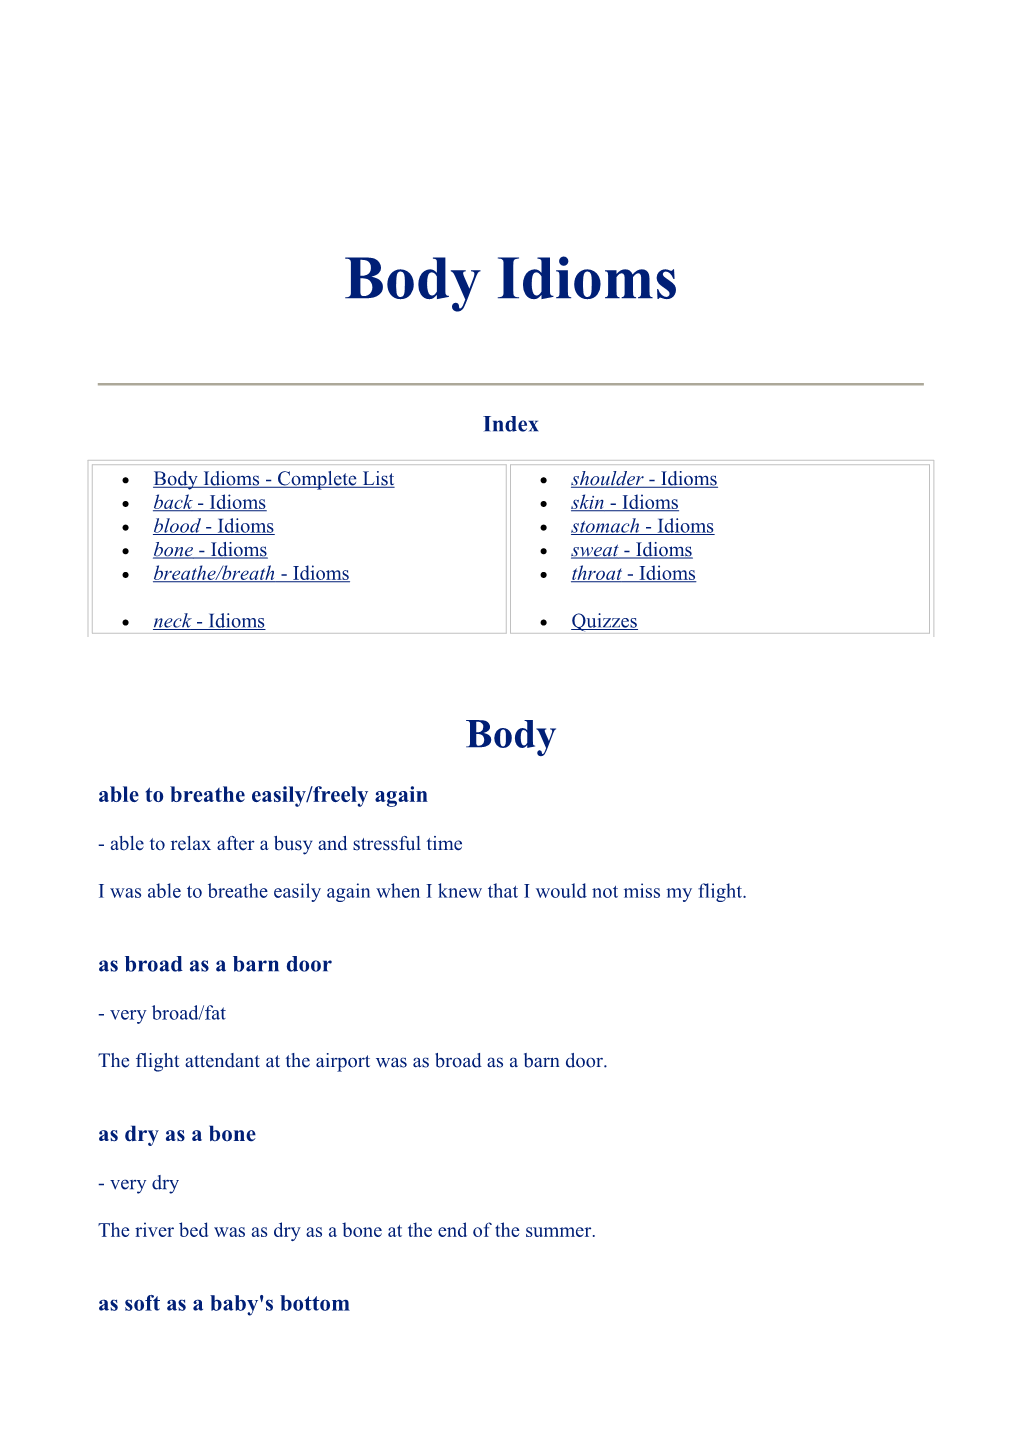 Body Idioms - Complete List